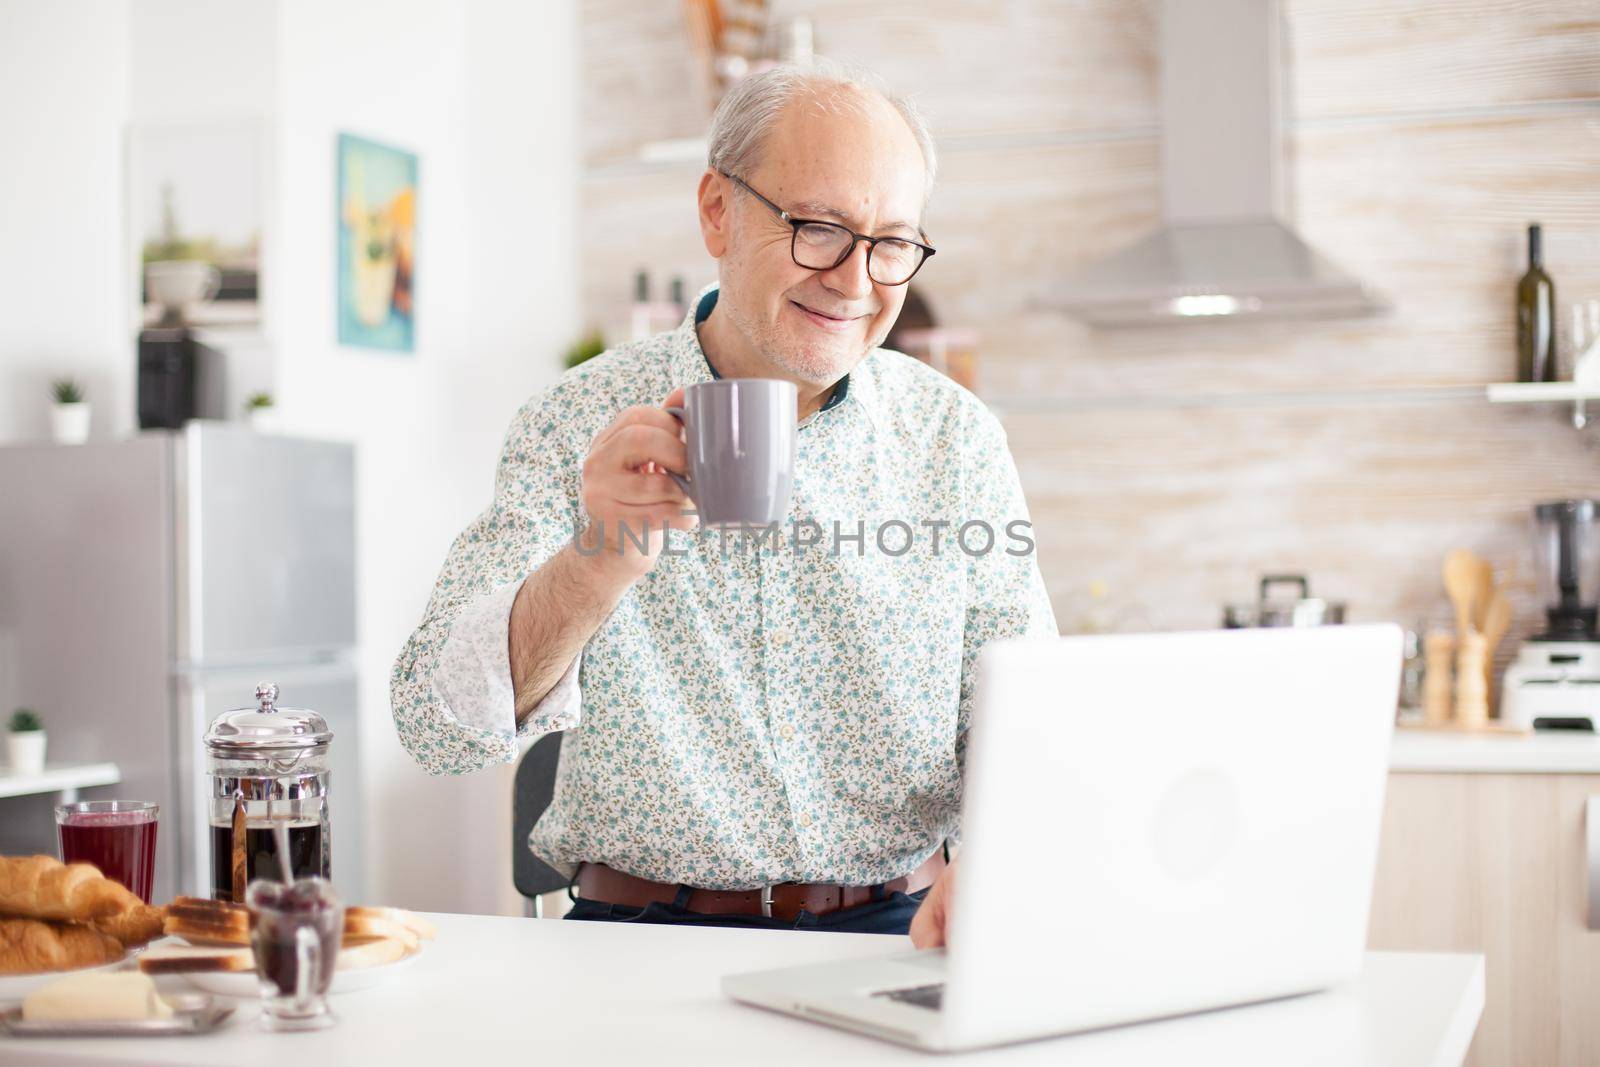 Cheerful senior man during video conference in kitchen while enjoying breakfast and cup of coffee. Elderly person using internet online chat technology video webcam making a video call connection camera communication conference call